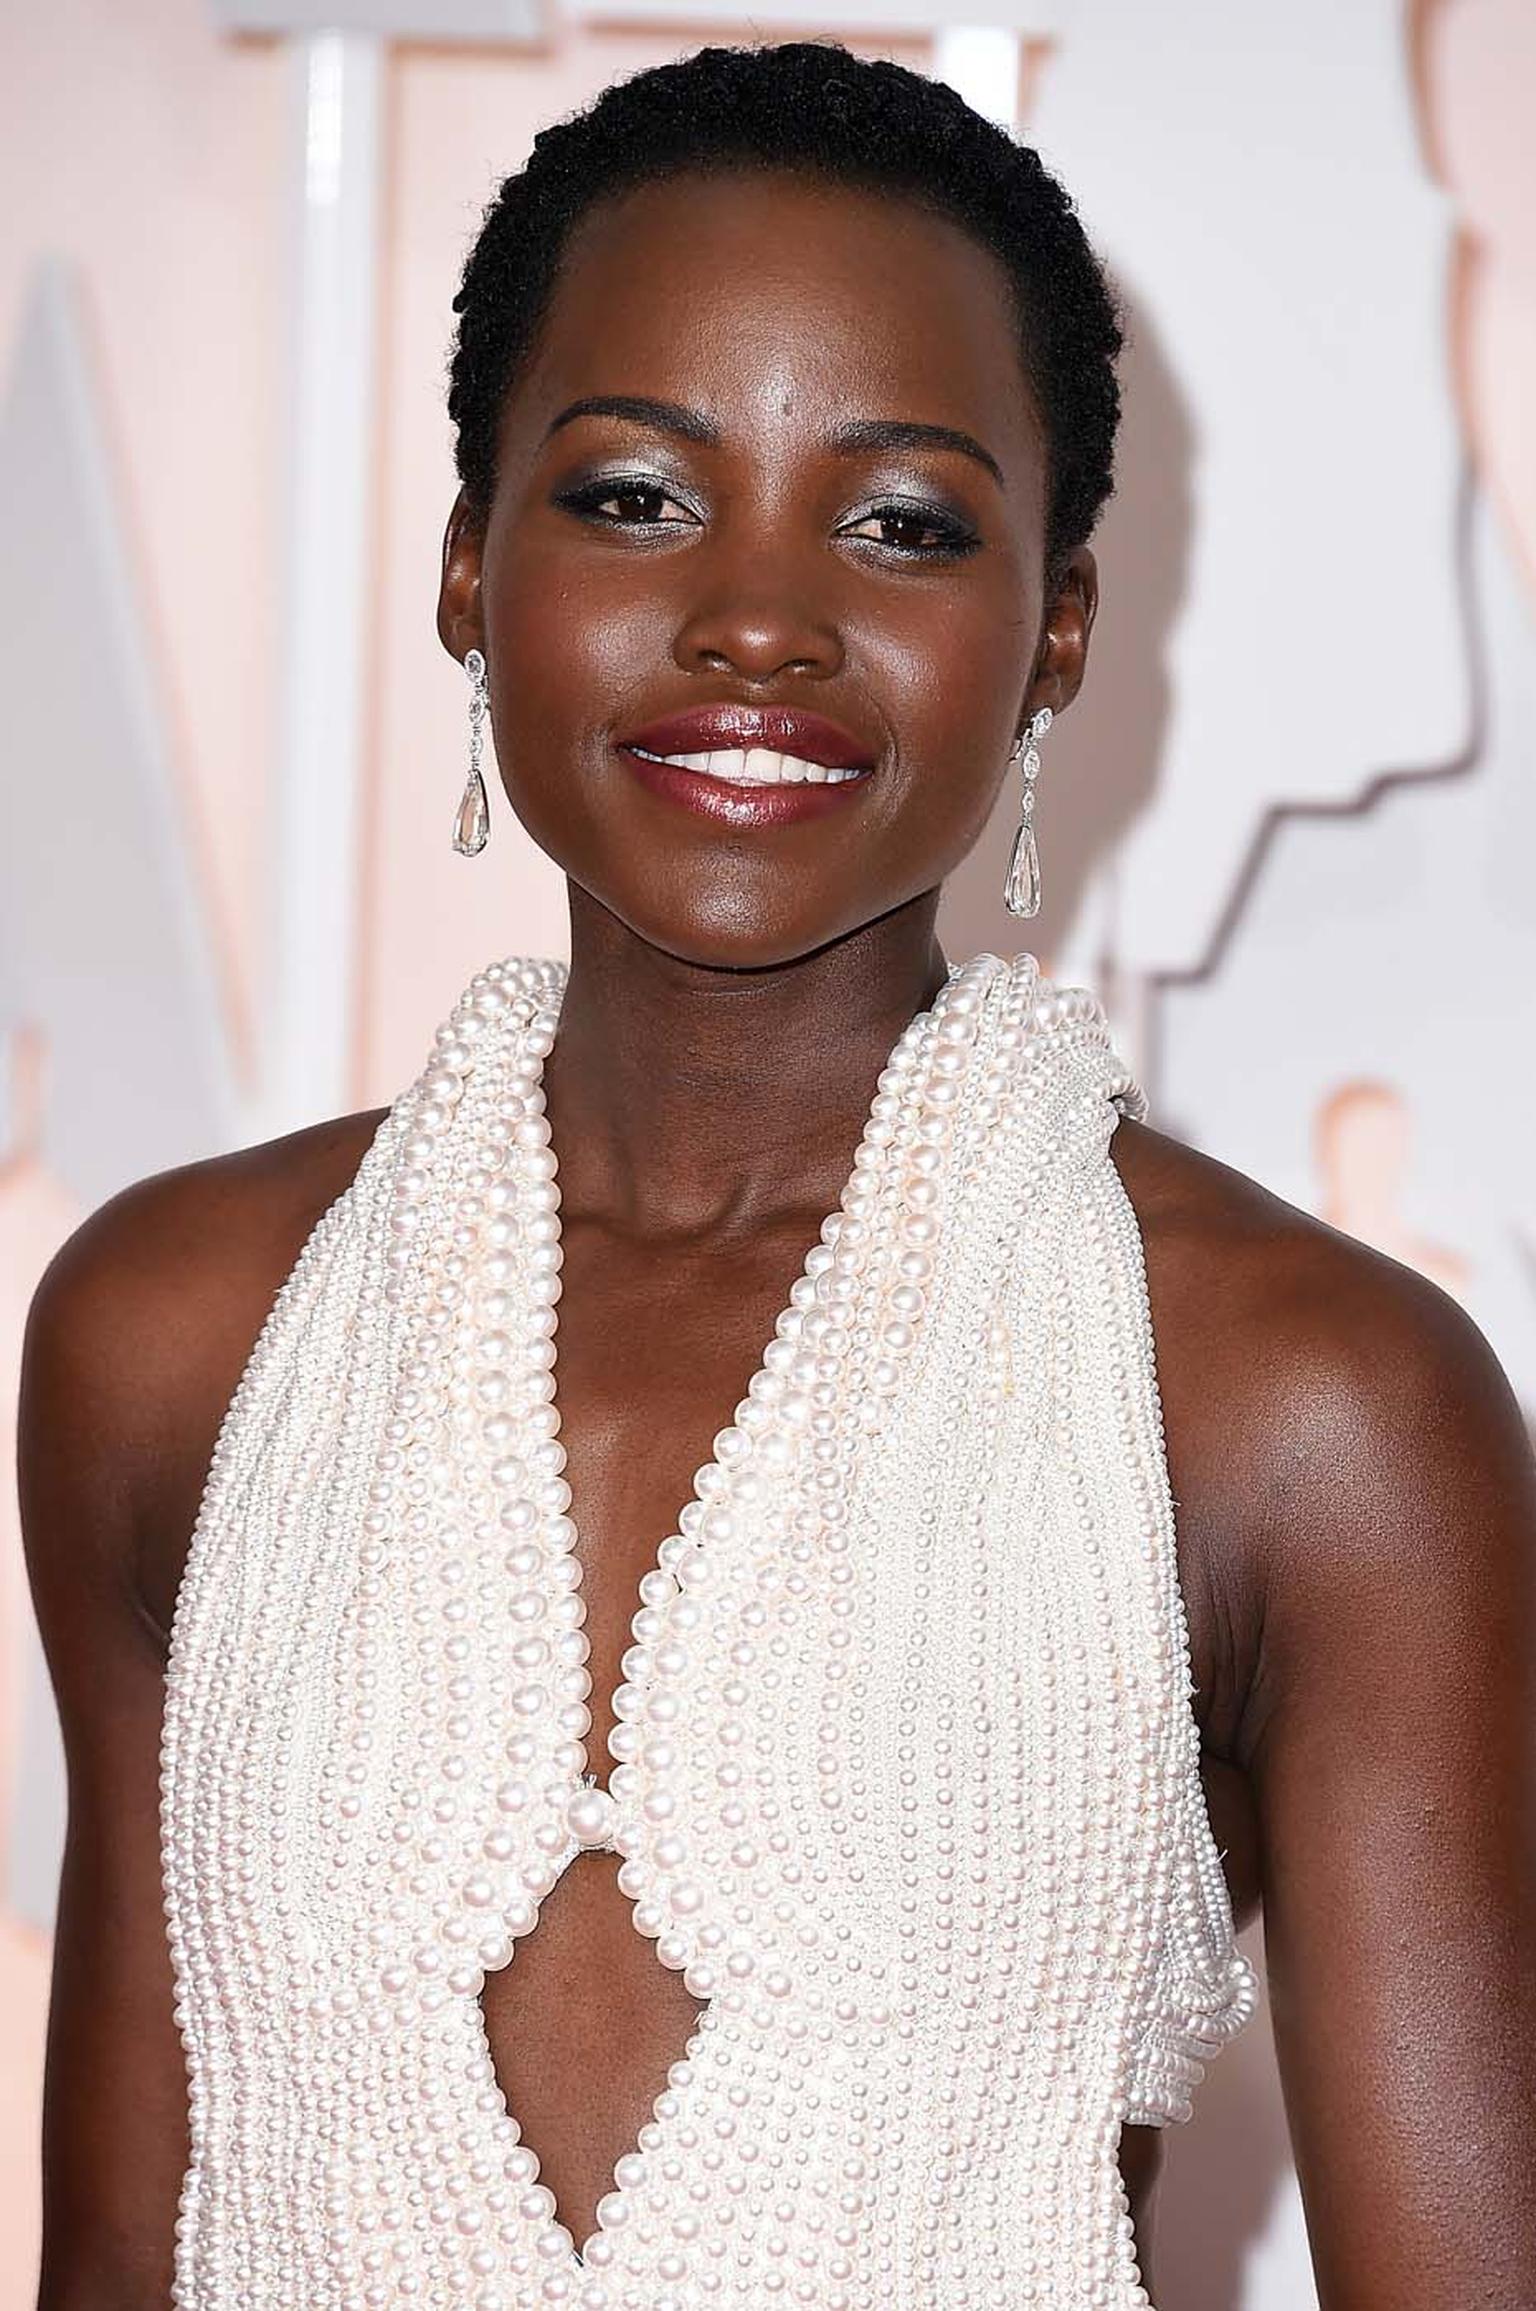 Pearls were a popular choice at this year's Oscars, but instead of choosing them as her red carpet jewelry, actress Lupita Nyong'o wore all 6,000 of them in the shape of her custom Calvin Klein dress. She did, however, add just the right amount of sparkle